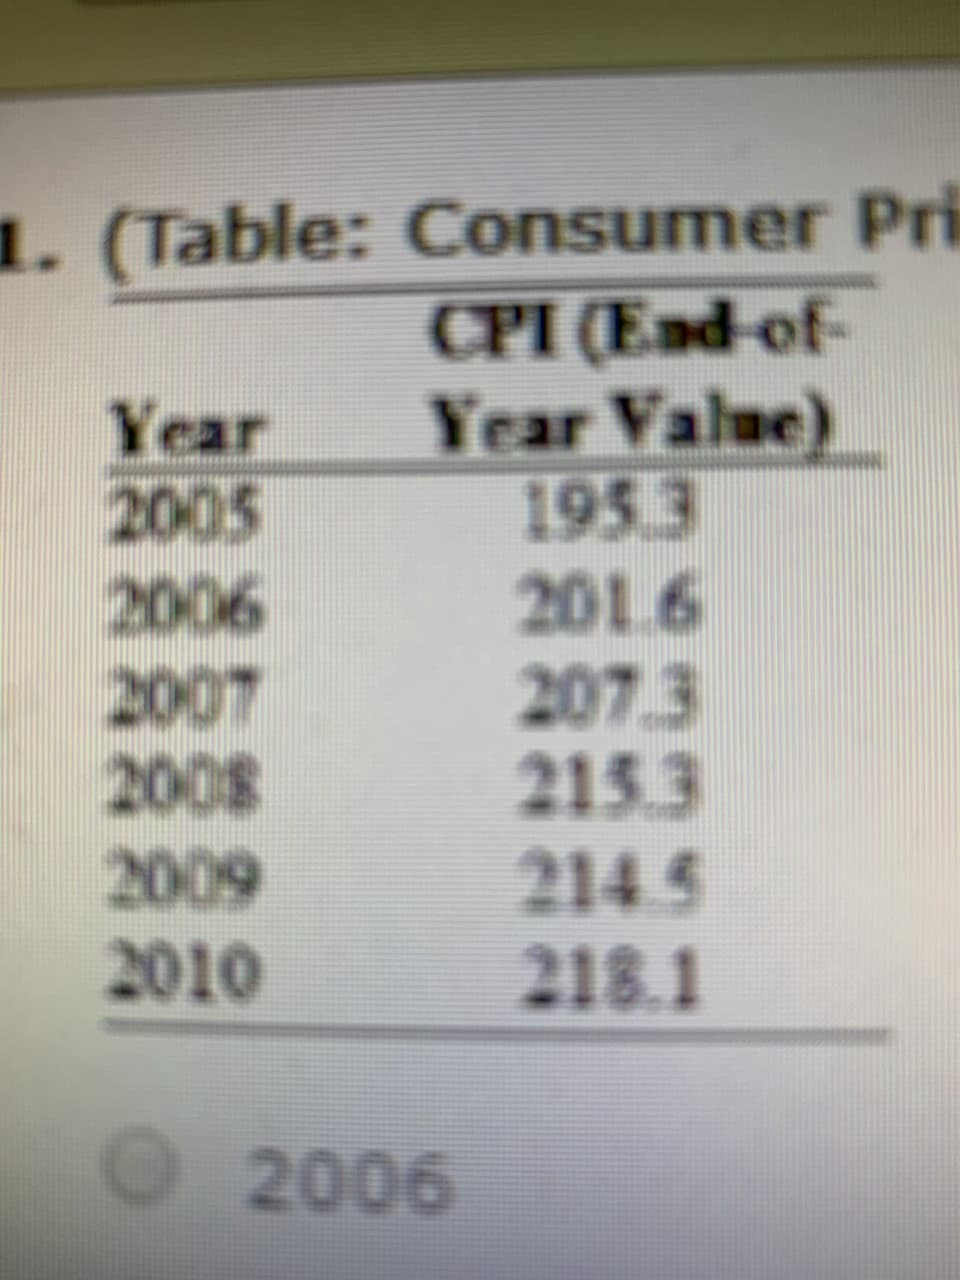 1. (Table: Consumer Pri
CPI (End of
Year Value)
1953
201.6
207.3
215.3
214.5
218.1
Year
2005
2006
2007
2008
2009
2010
O 2006
